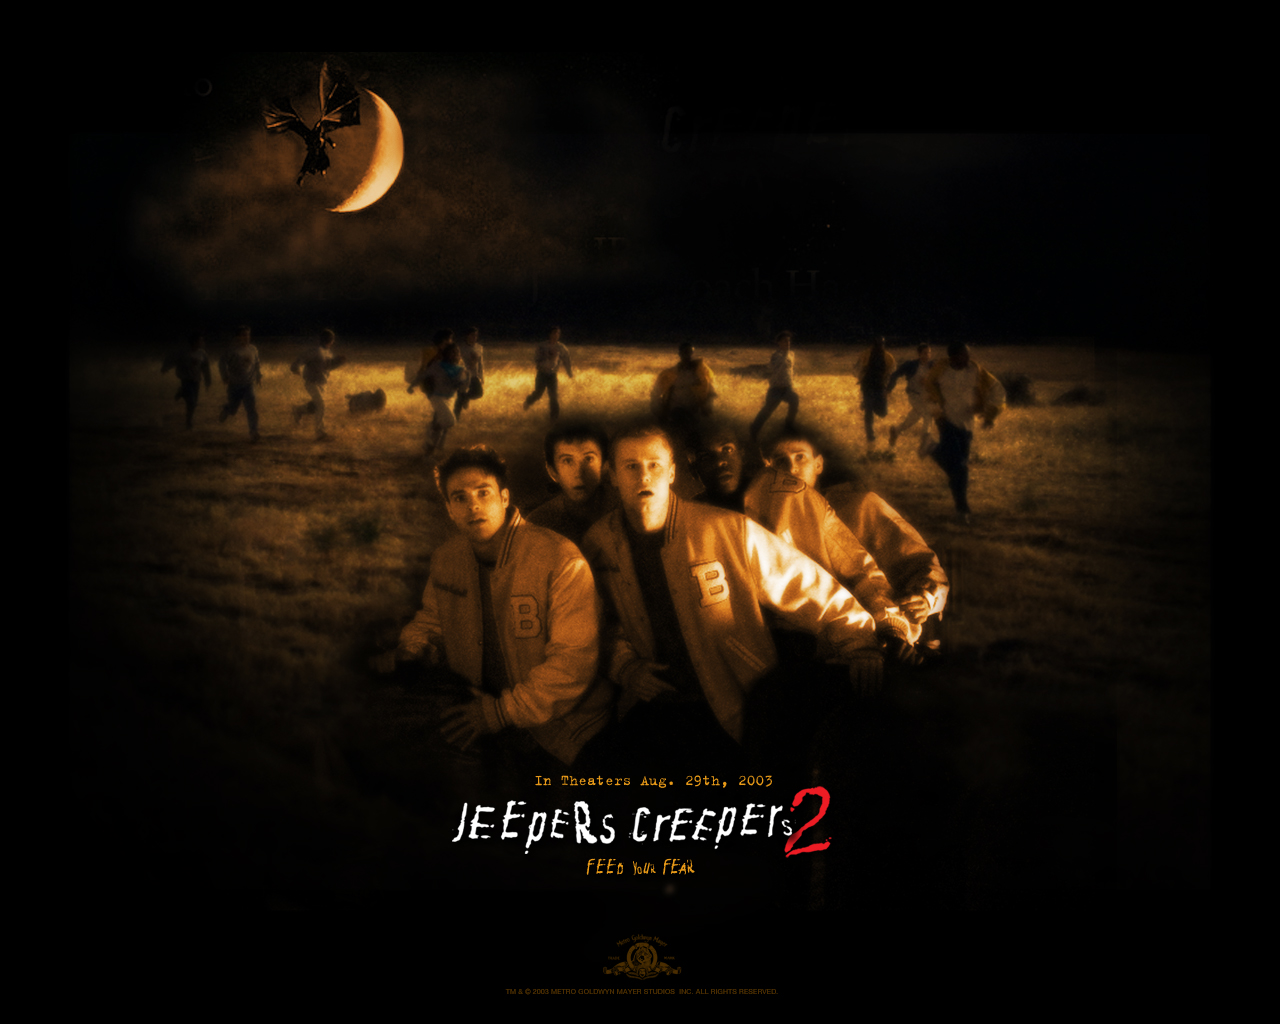 jeepers creepers 3 full movie in hindi free download utorrent